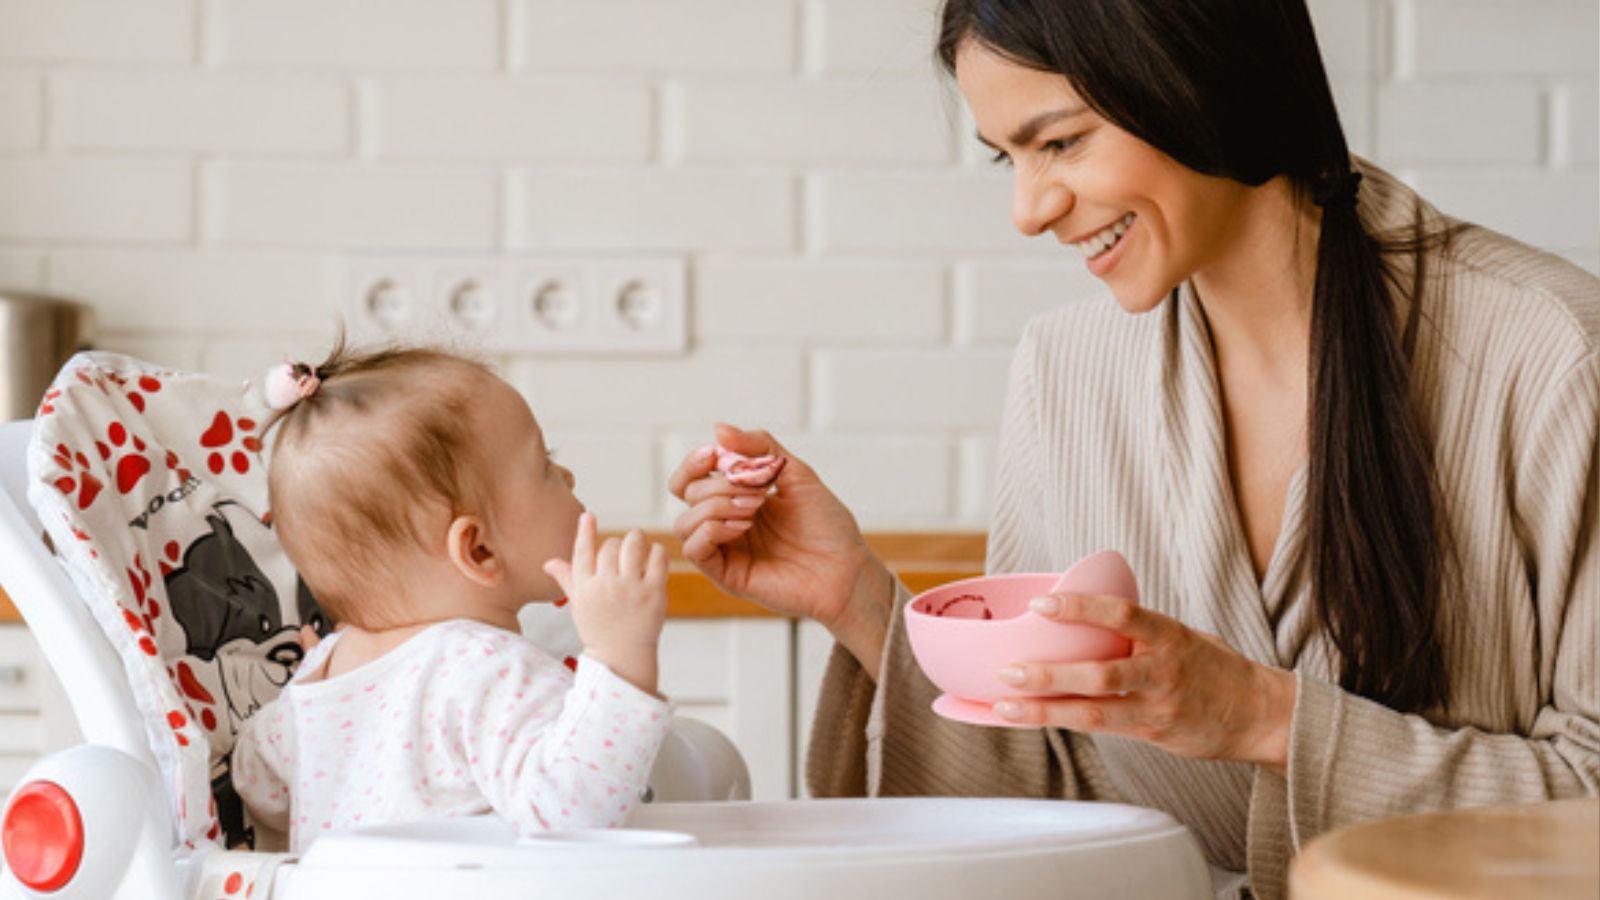 Young brunette mother smiling and feeding her baby in kitchen at home.jpg